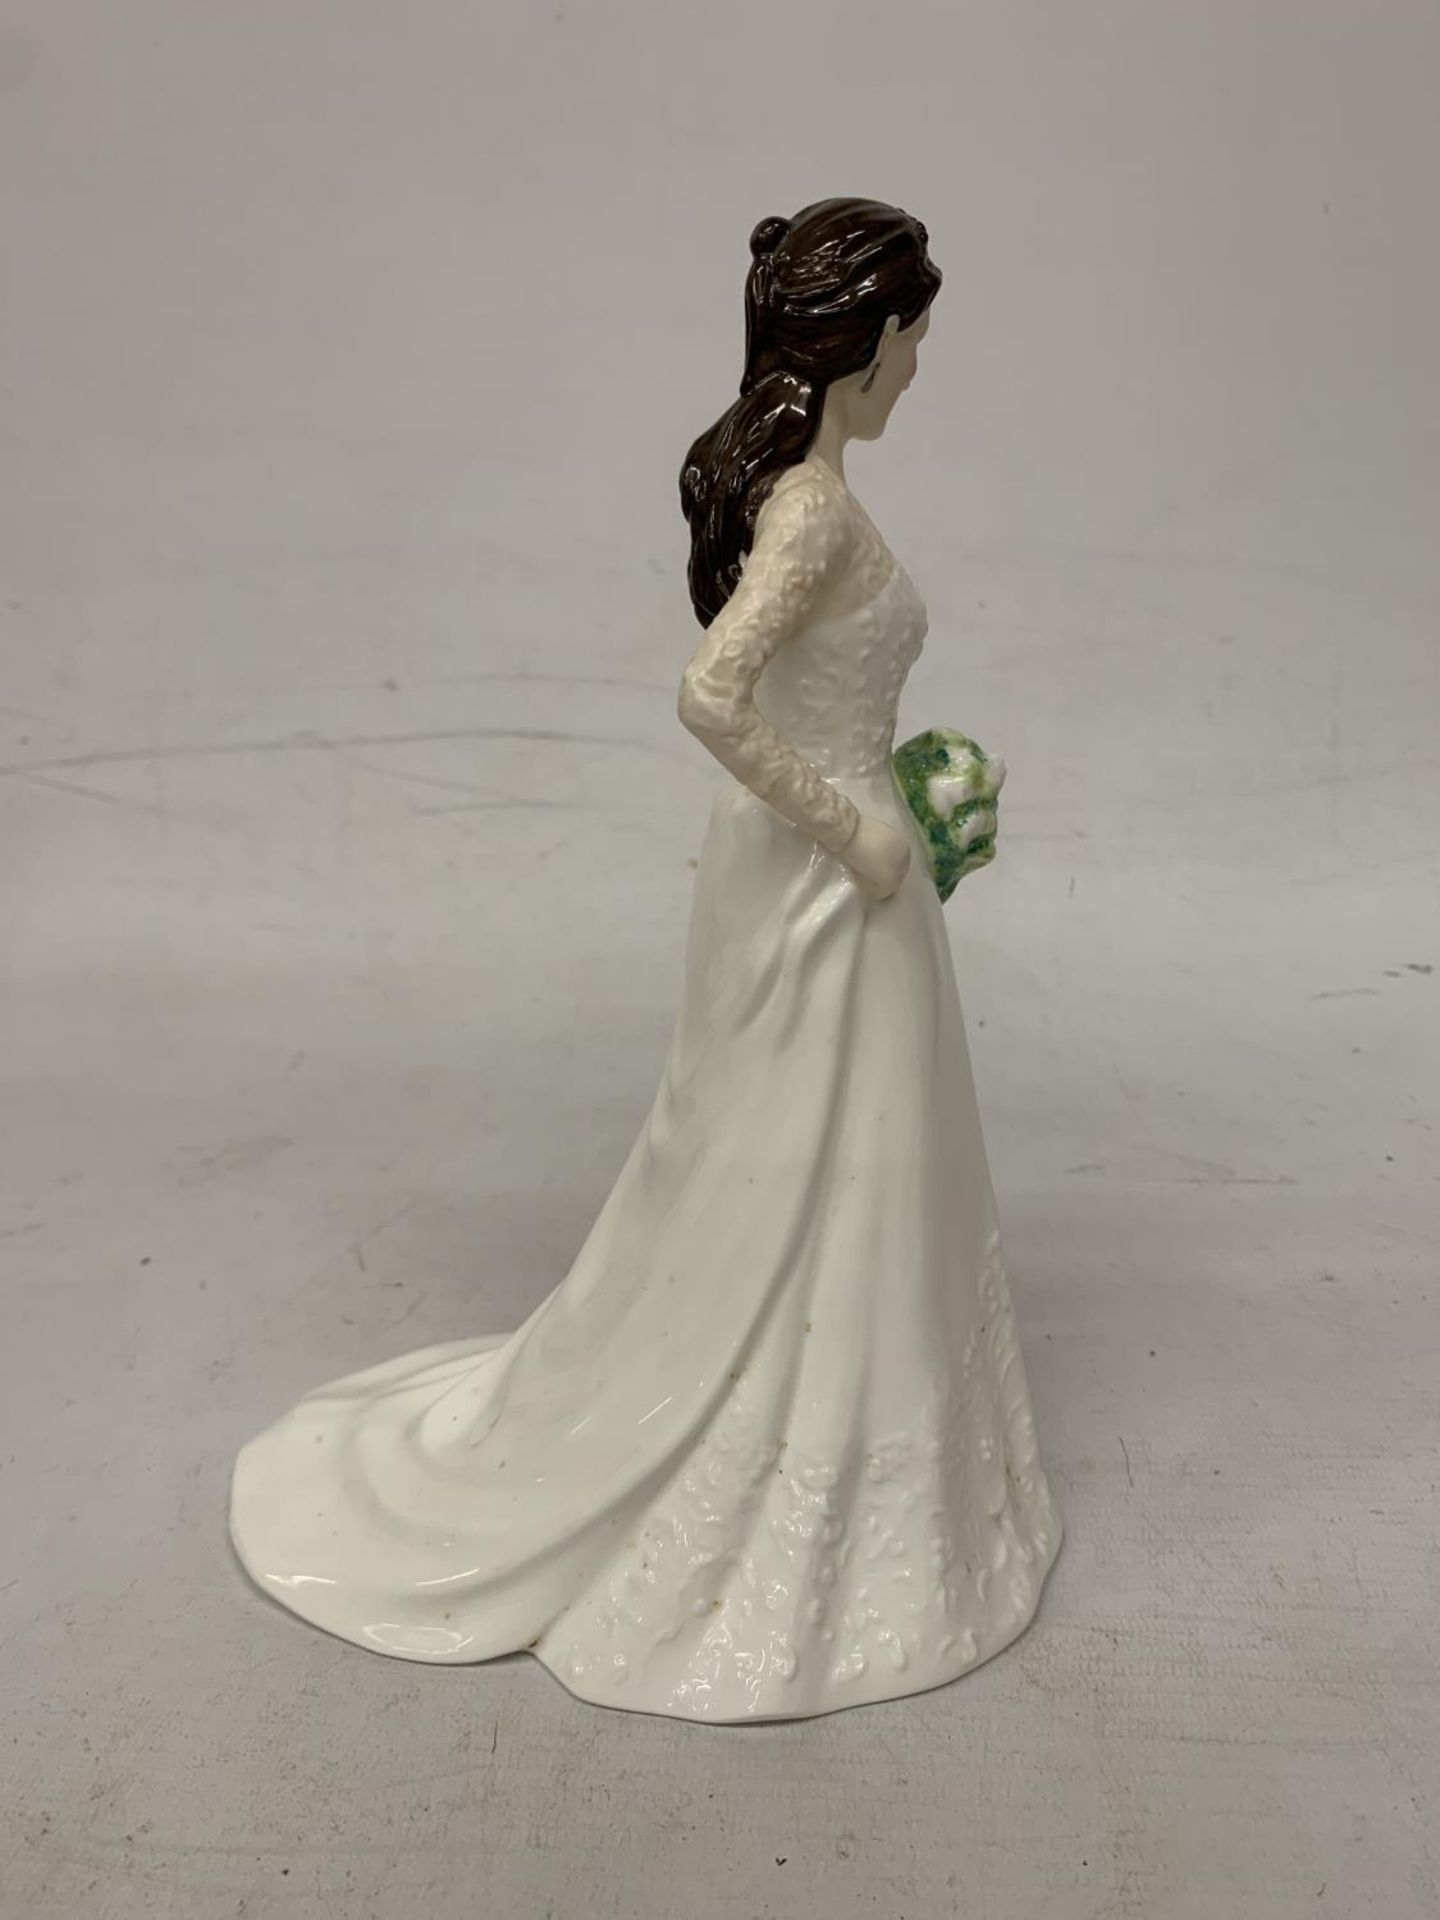 A ROYAL WORCESTER FIGURE "CATHERINE DUCHESS OF CAMBRIDGE" LIMITED EDITION OF 2995 - Image 2 of 4